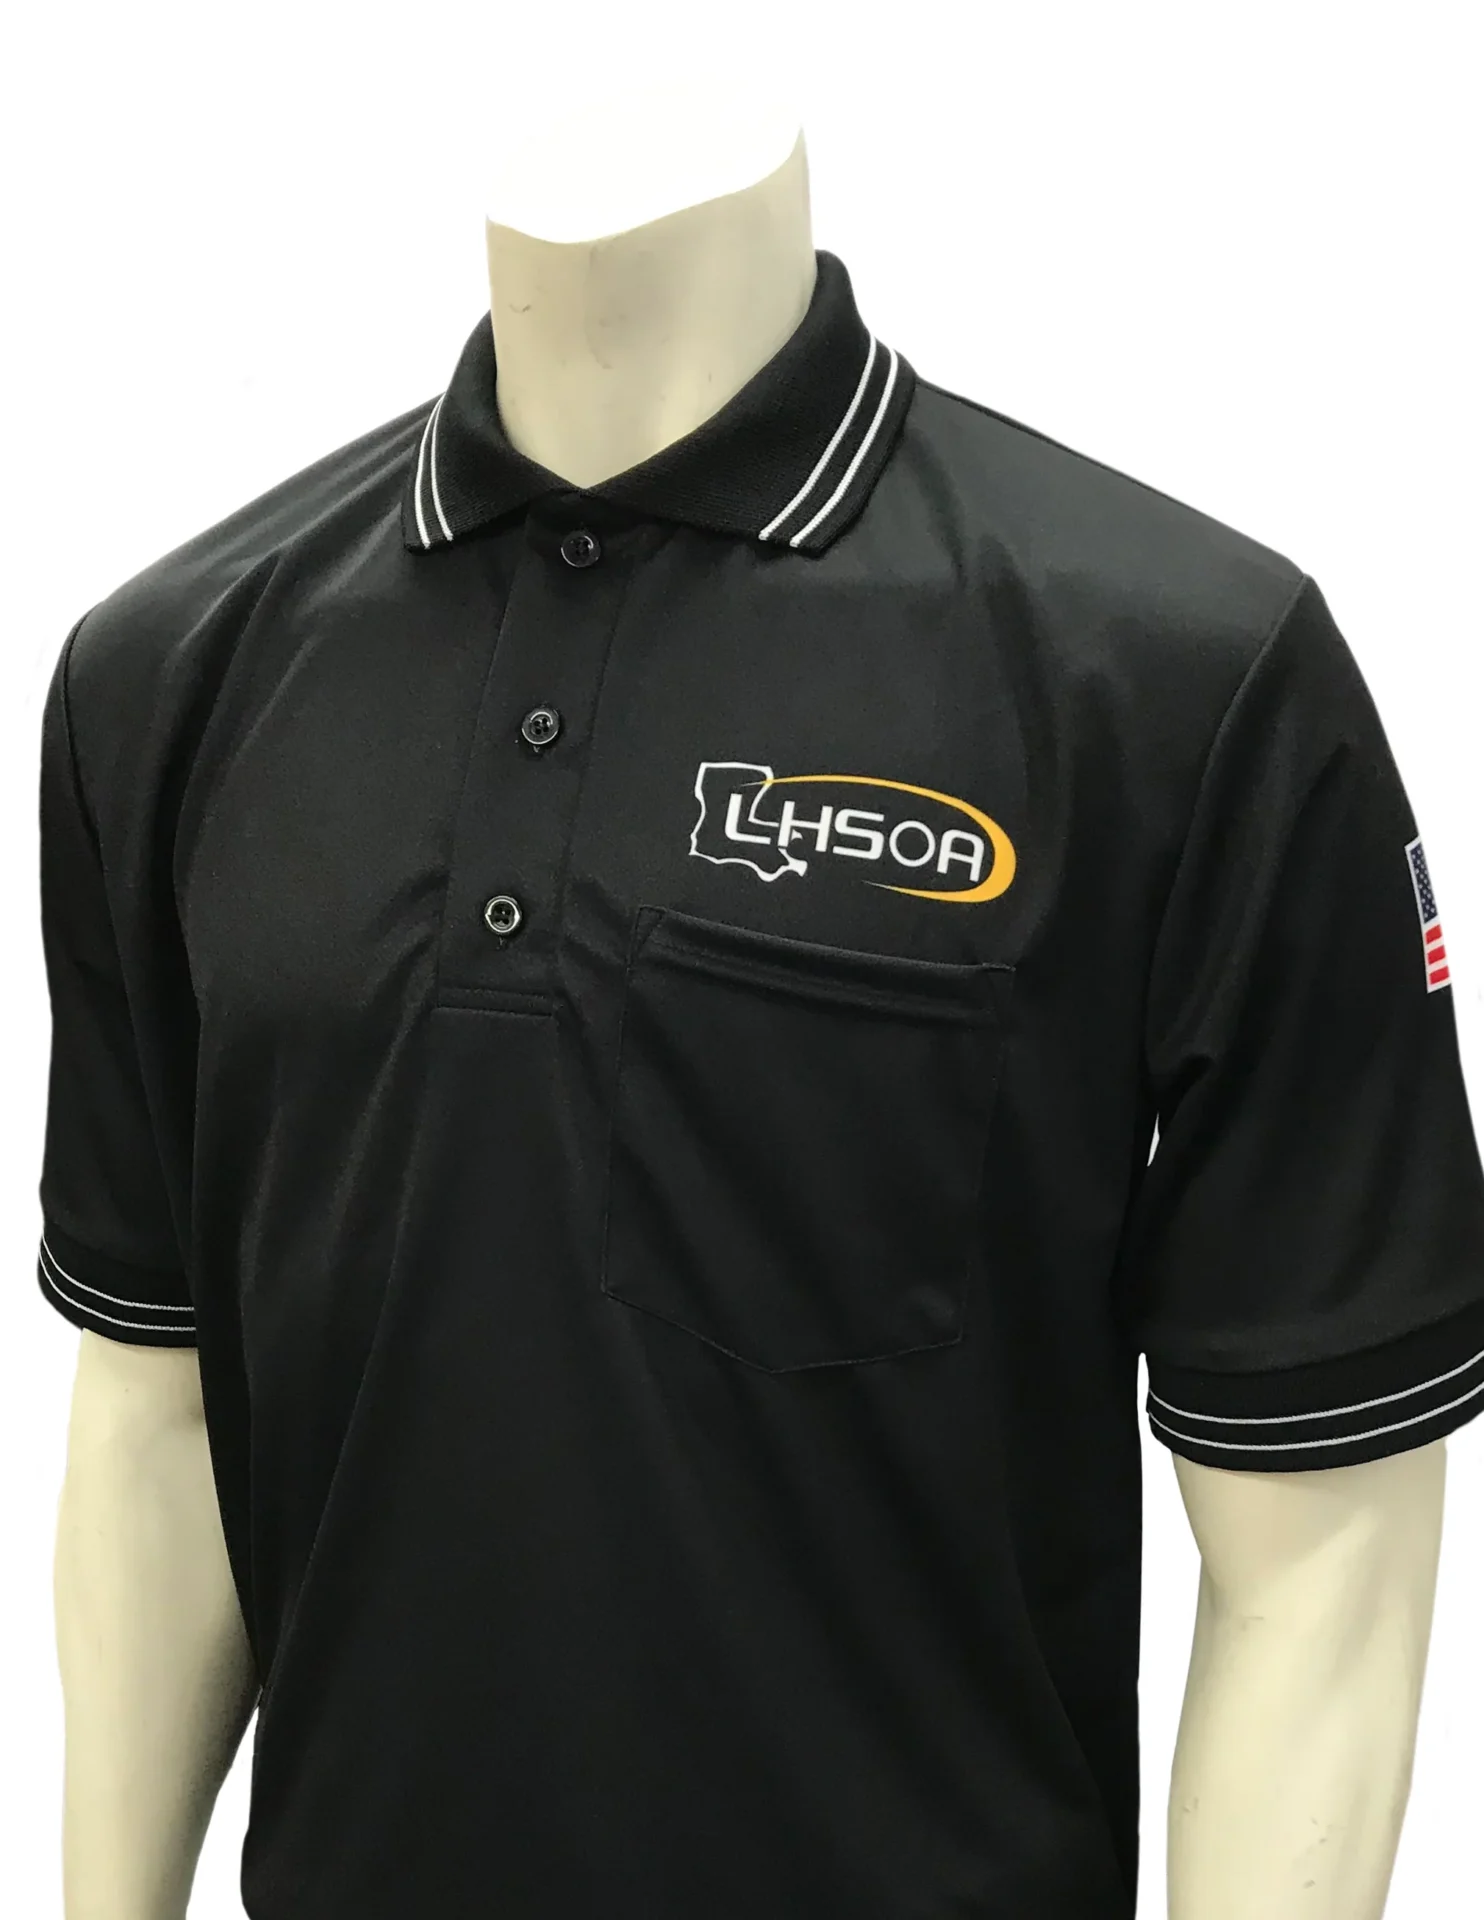 A black shirt with an orange and white logo.